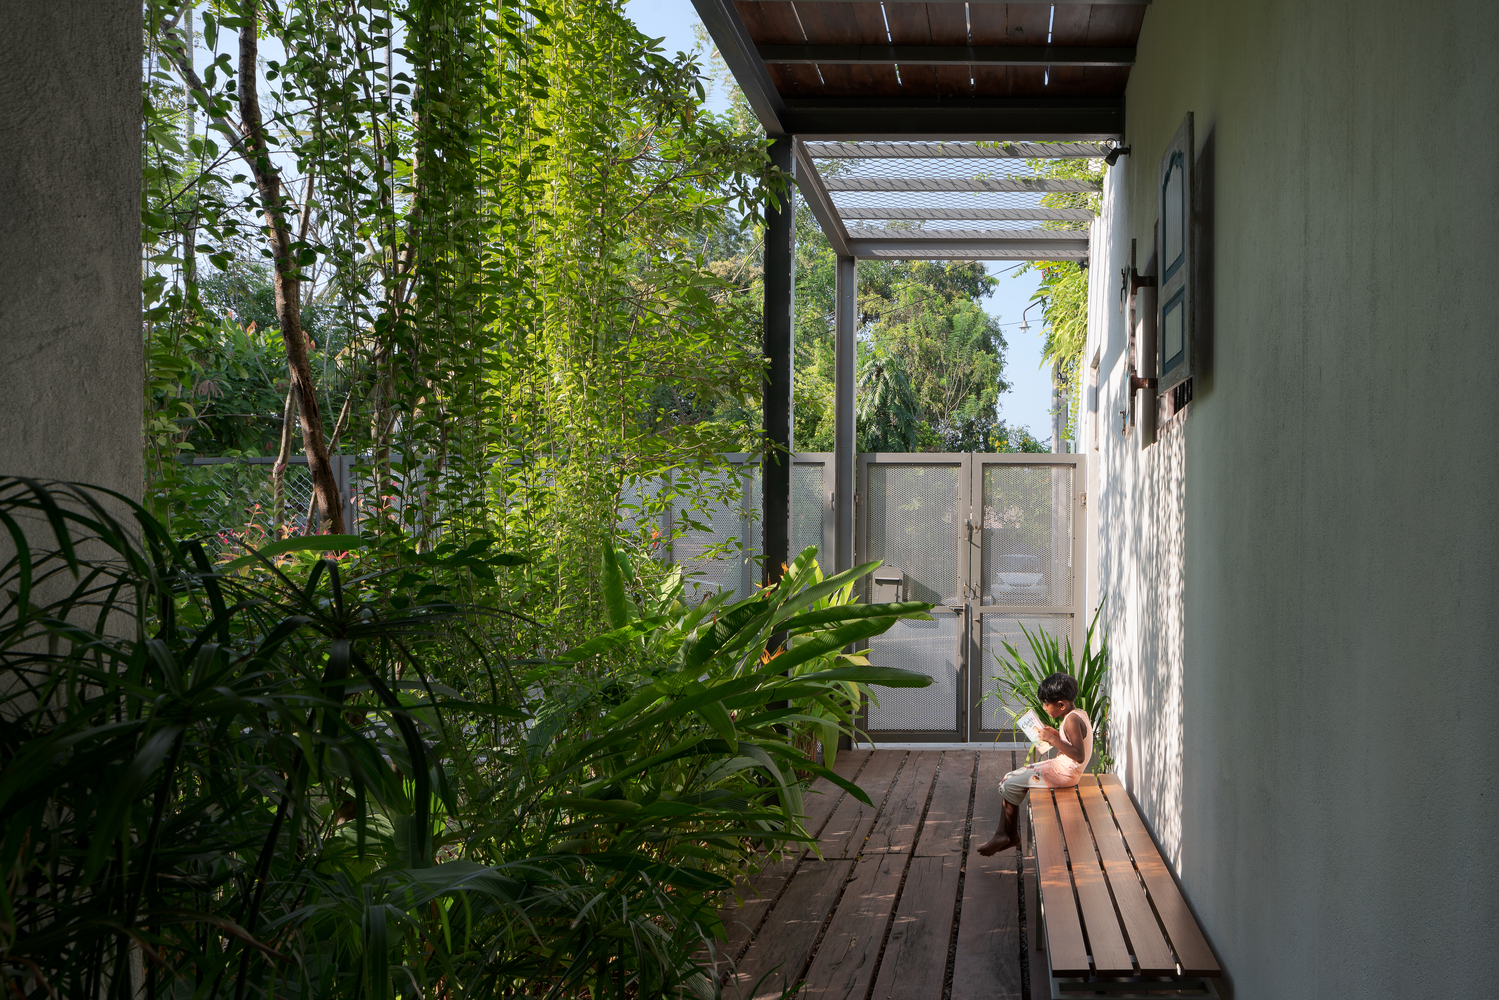 Square Concrete House. Live In Harmony With The Green Of Nature - NewsFeed